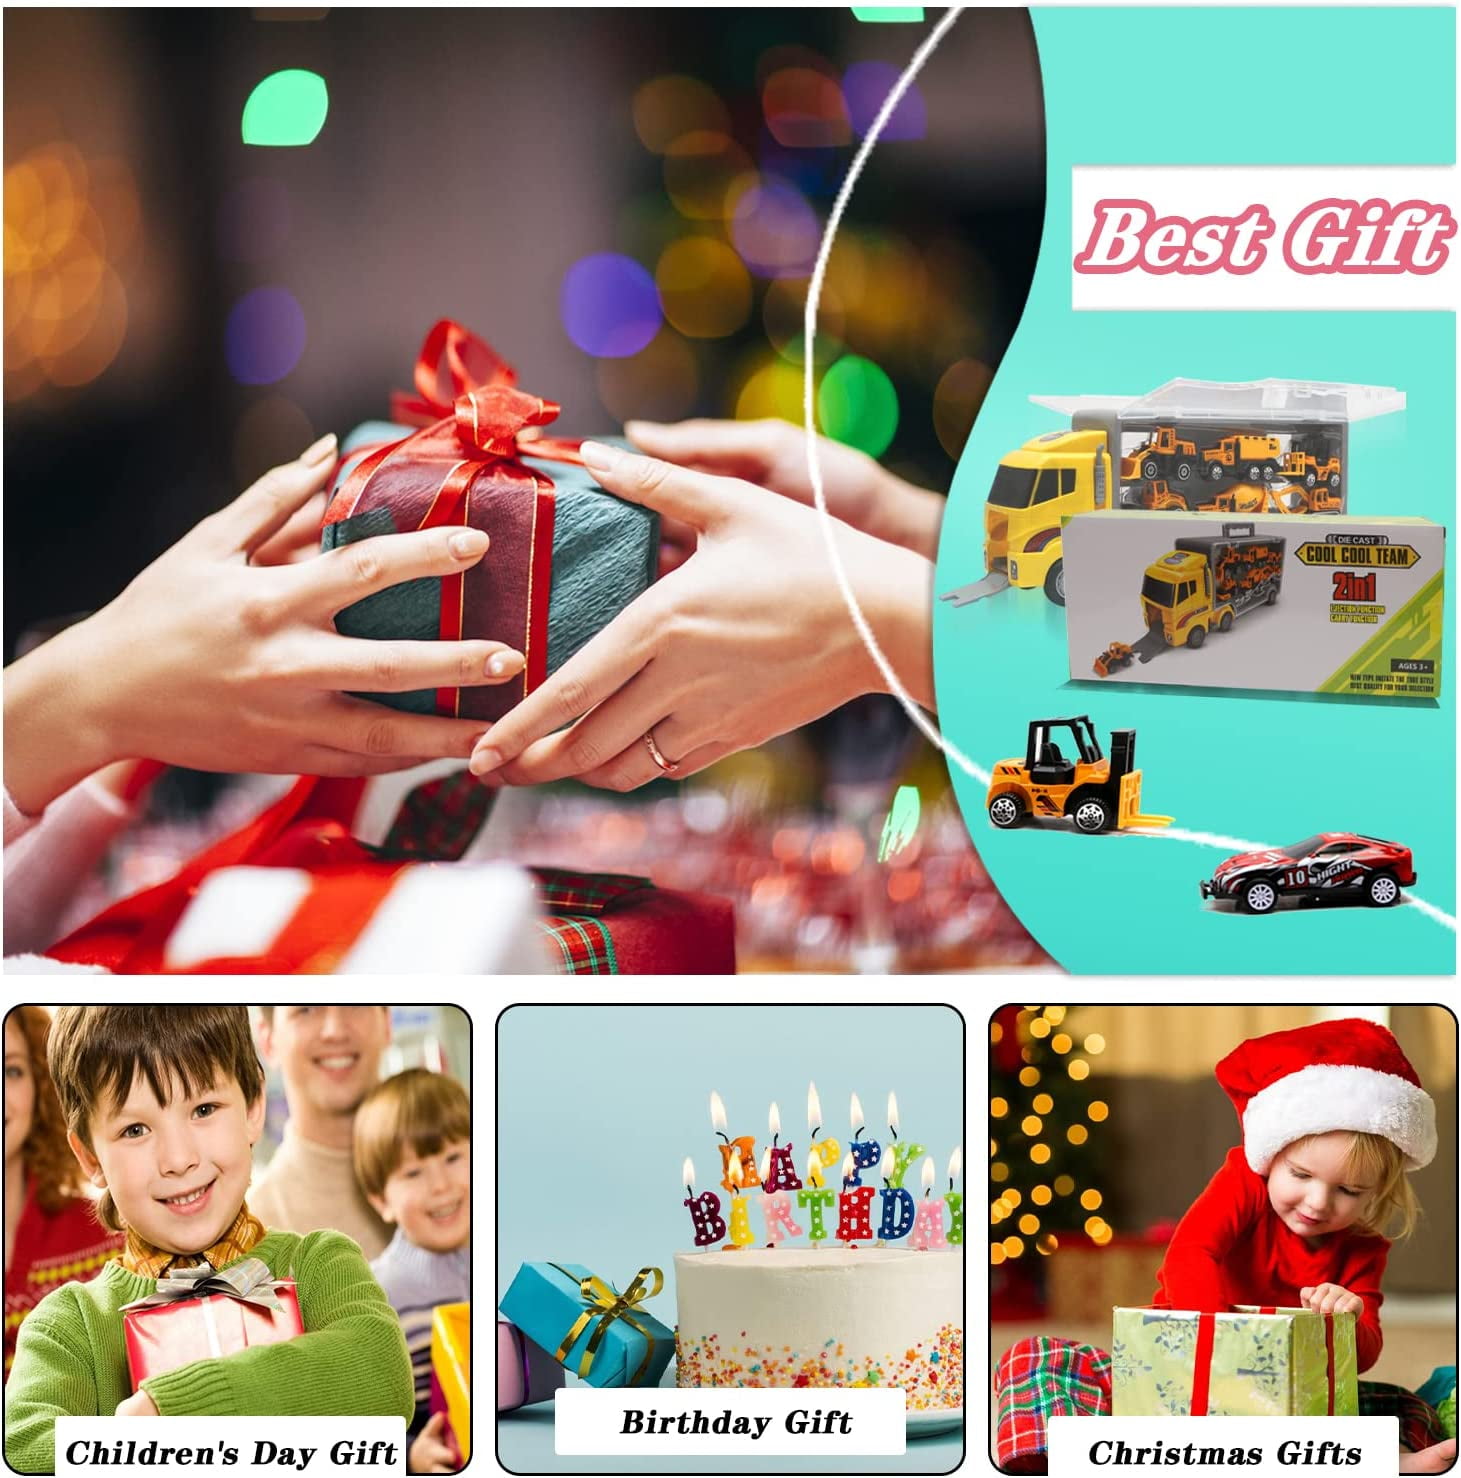 The Days of Gifts - Multi-Day Gifts for Birthdays, The 12 Days of  Christmas, Just Because Gifts, Anniversary Gifts, and More